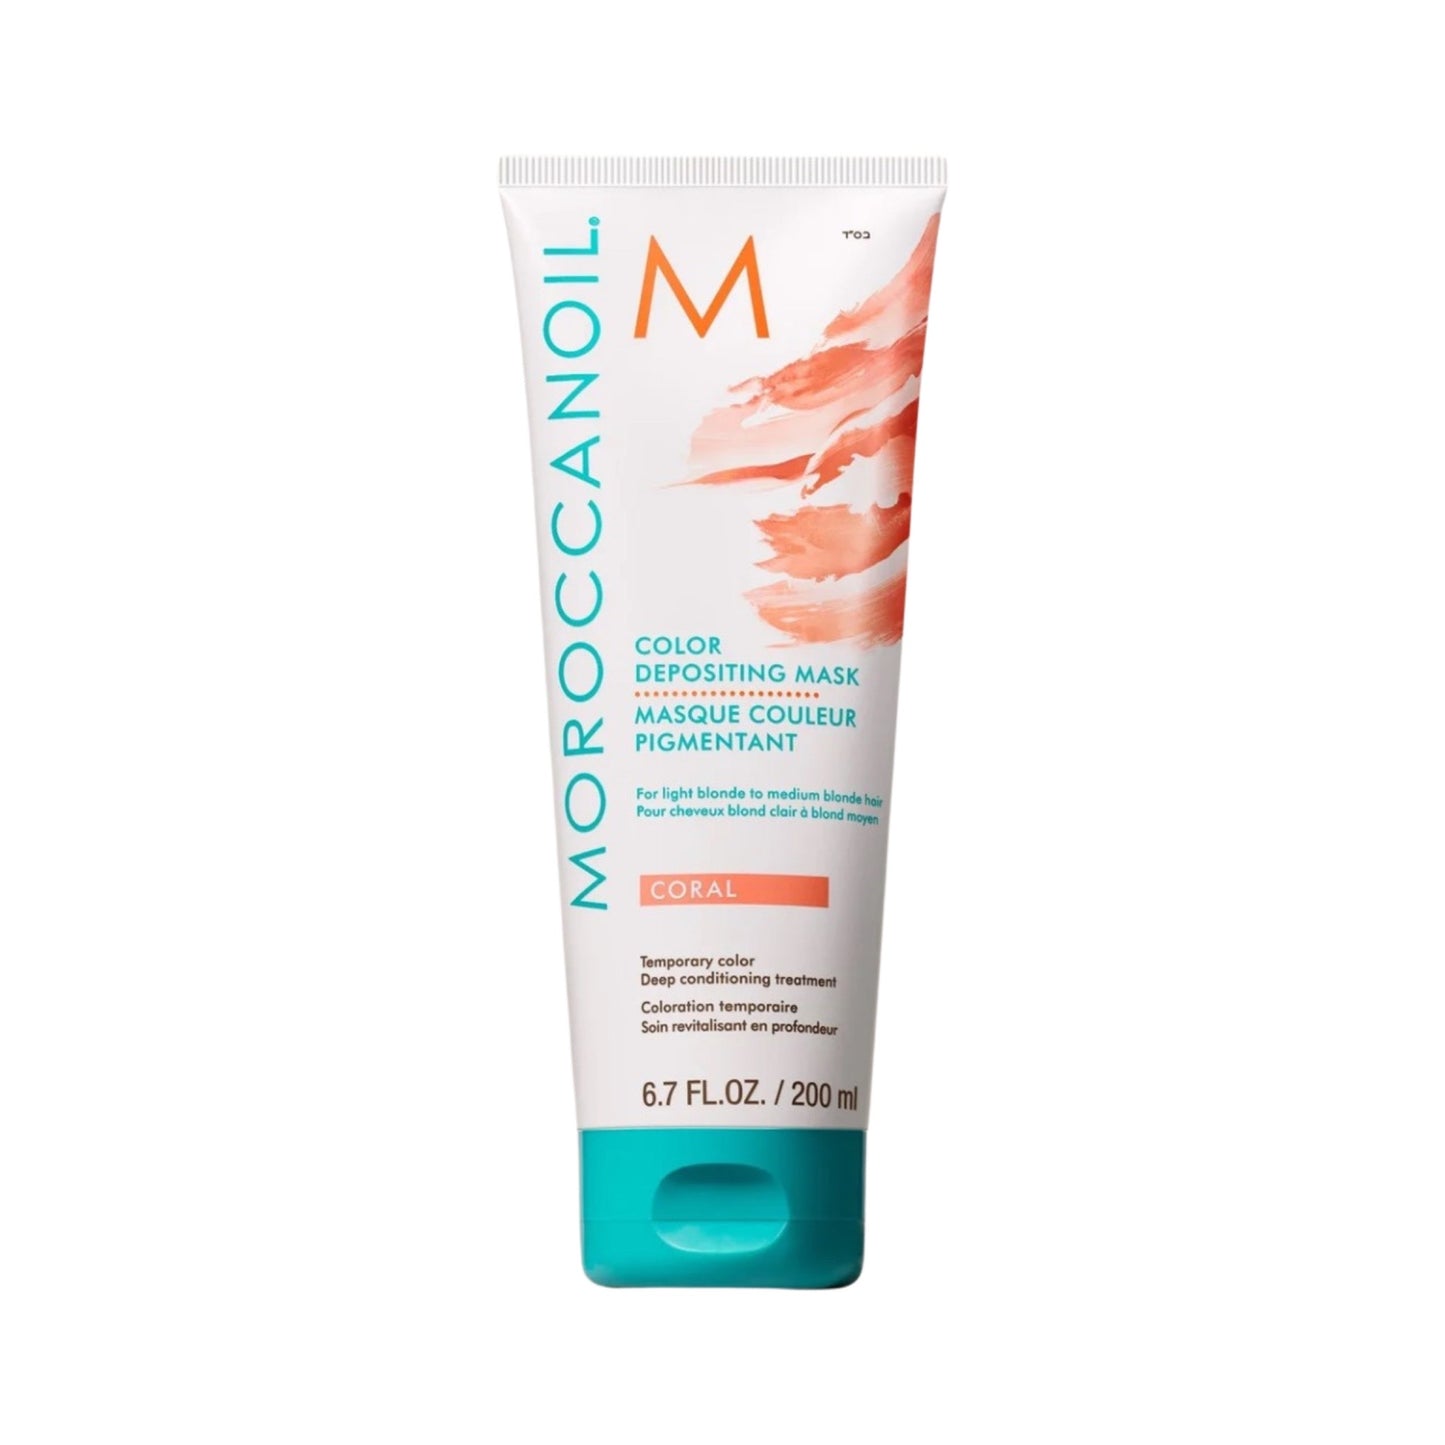 Moroccanoil - Coral color depositing mask - 200 ml